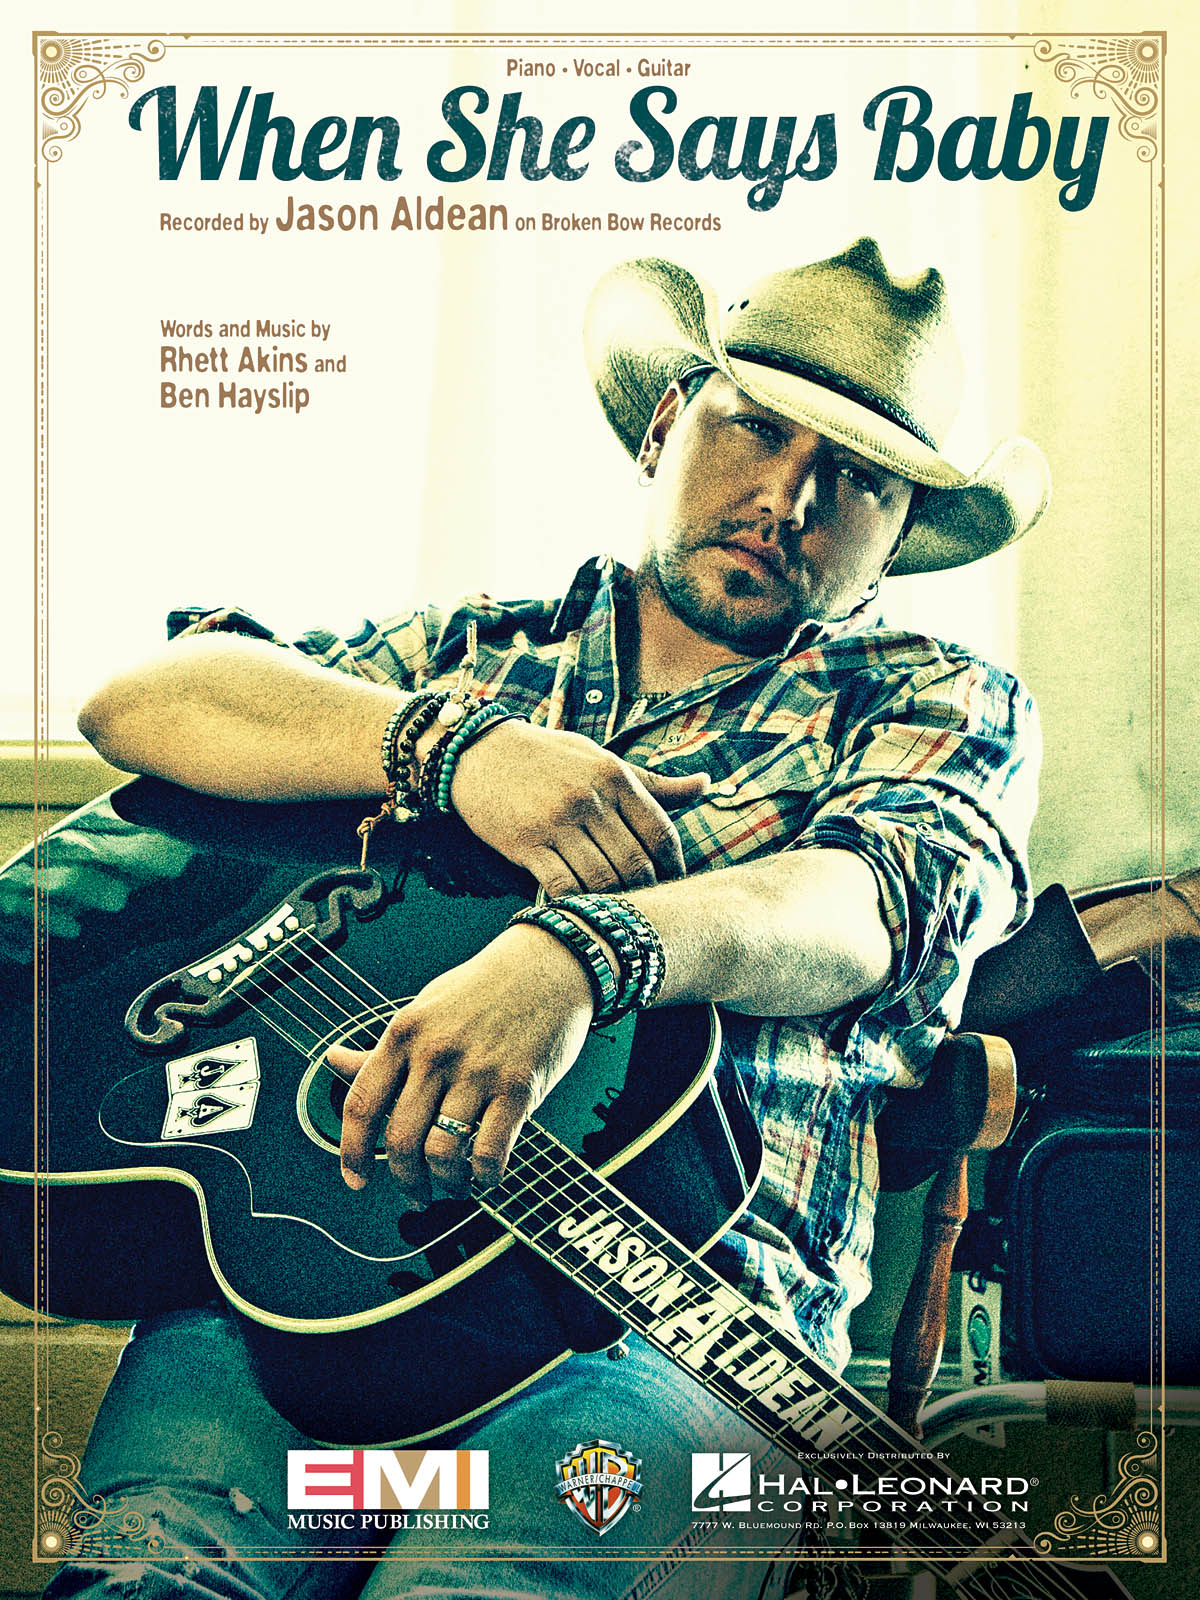 Jason Aldean: When She Says Baby: Piano  Vocal and Guitar: Single Sheet